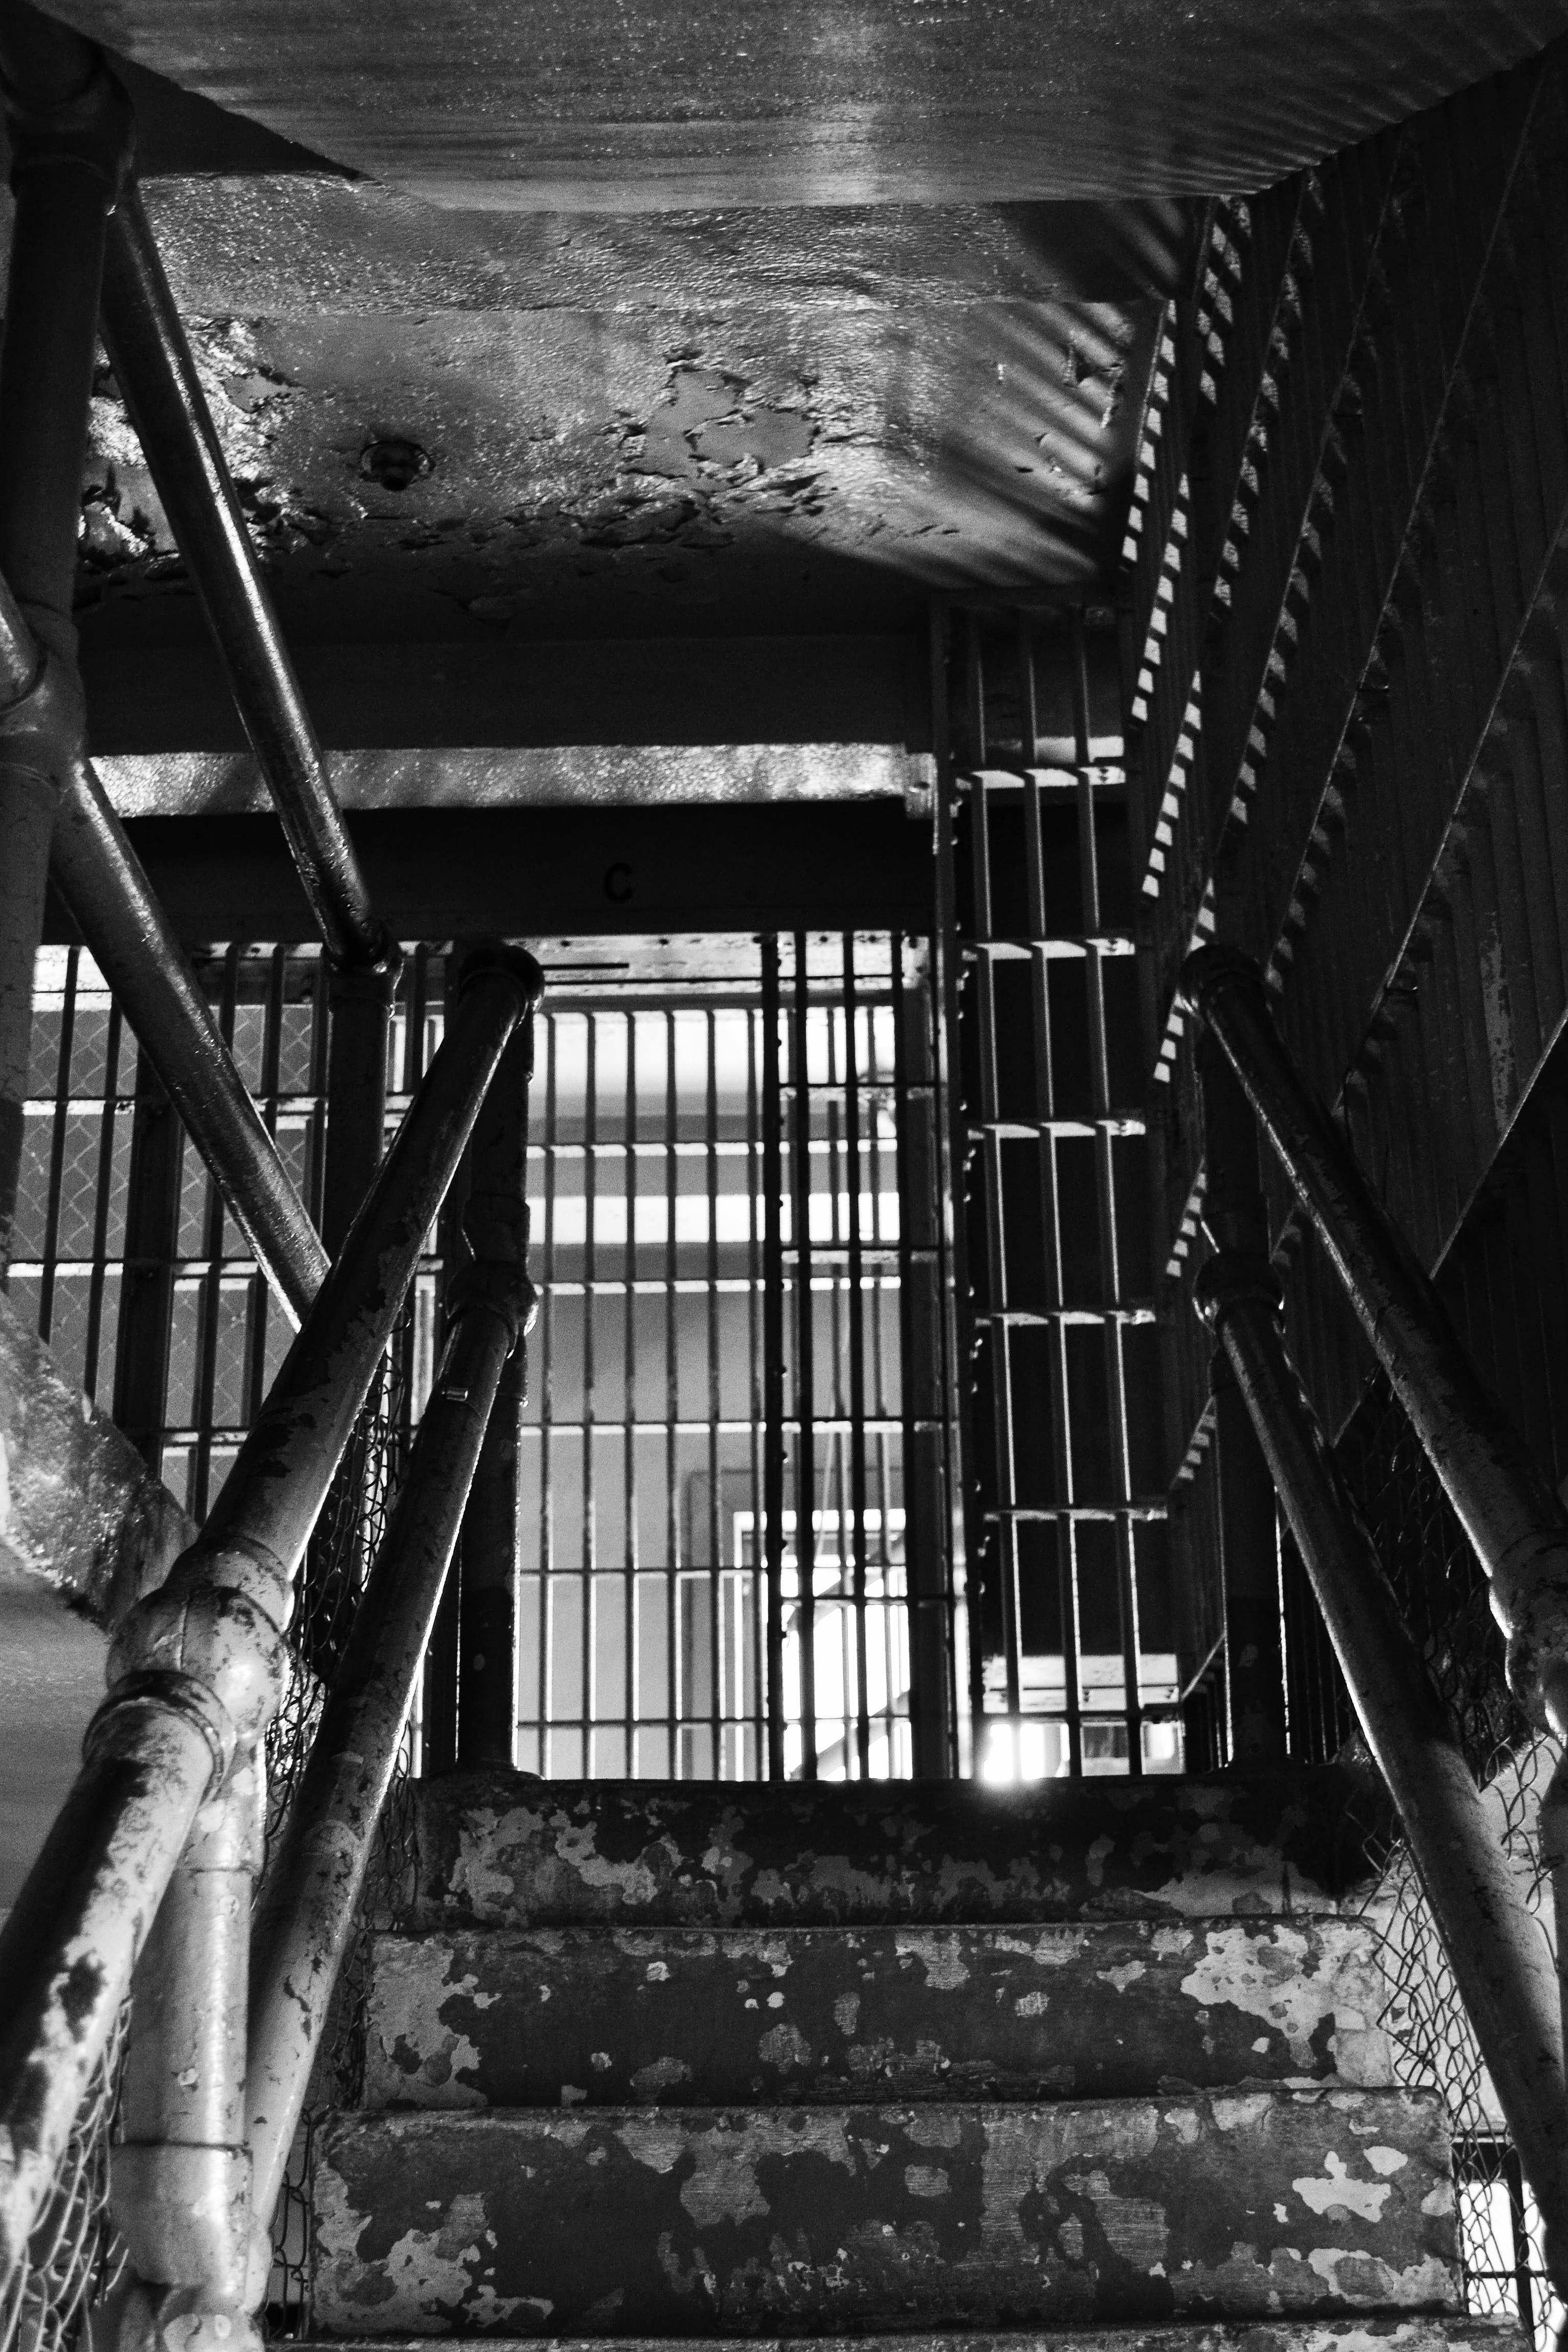 The staircase leading to the prison room, The staircase leading to the prison room